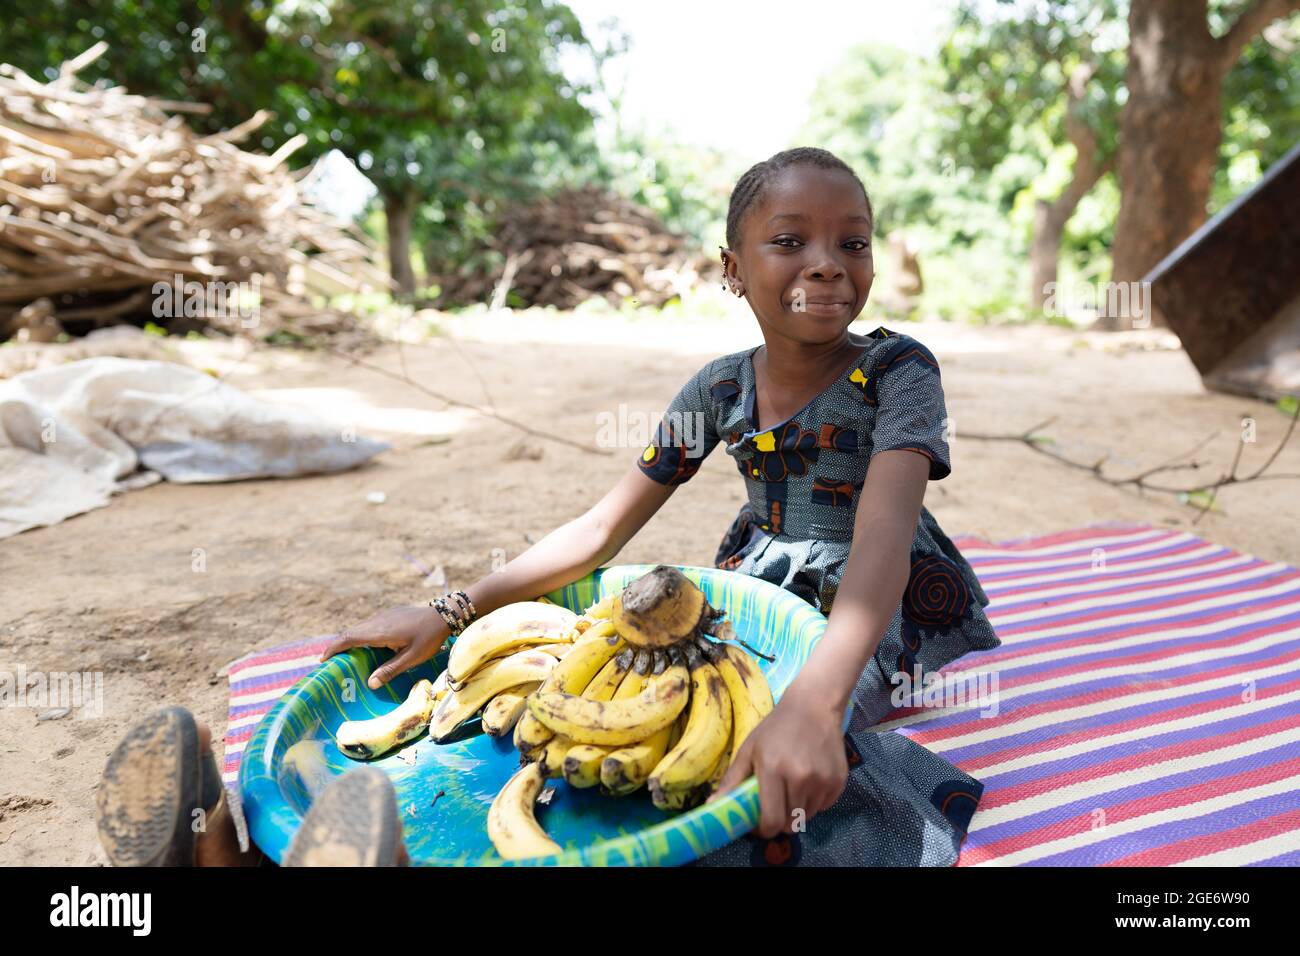 Pretty little African girl holding a big plate full of ripe bananas on her knees, smirking at camera Stock Photo